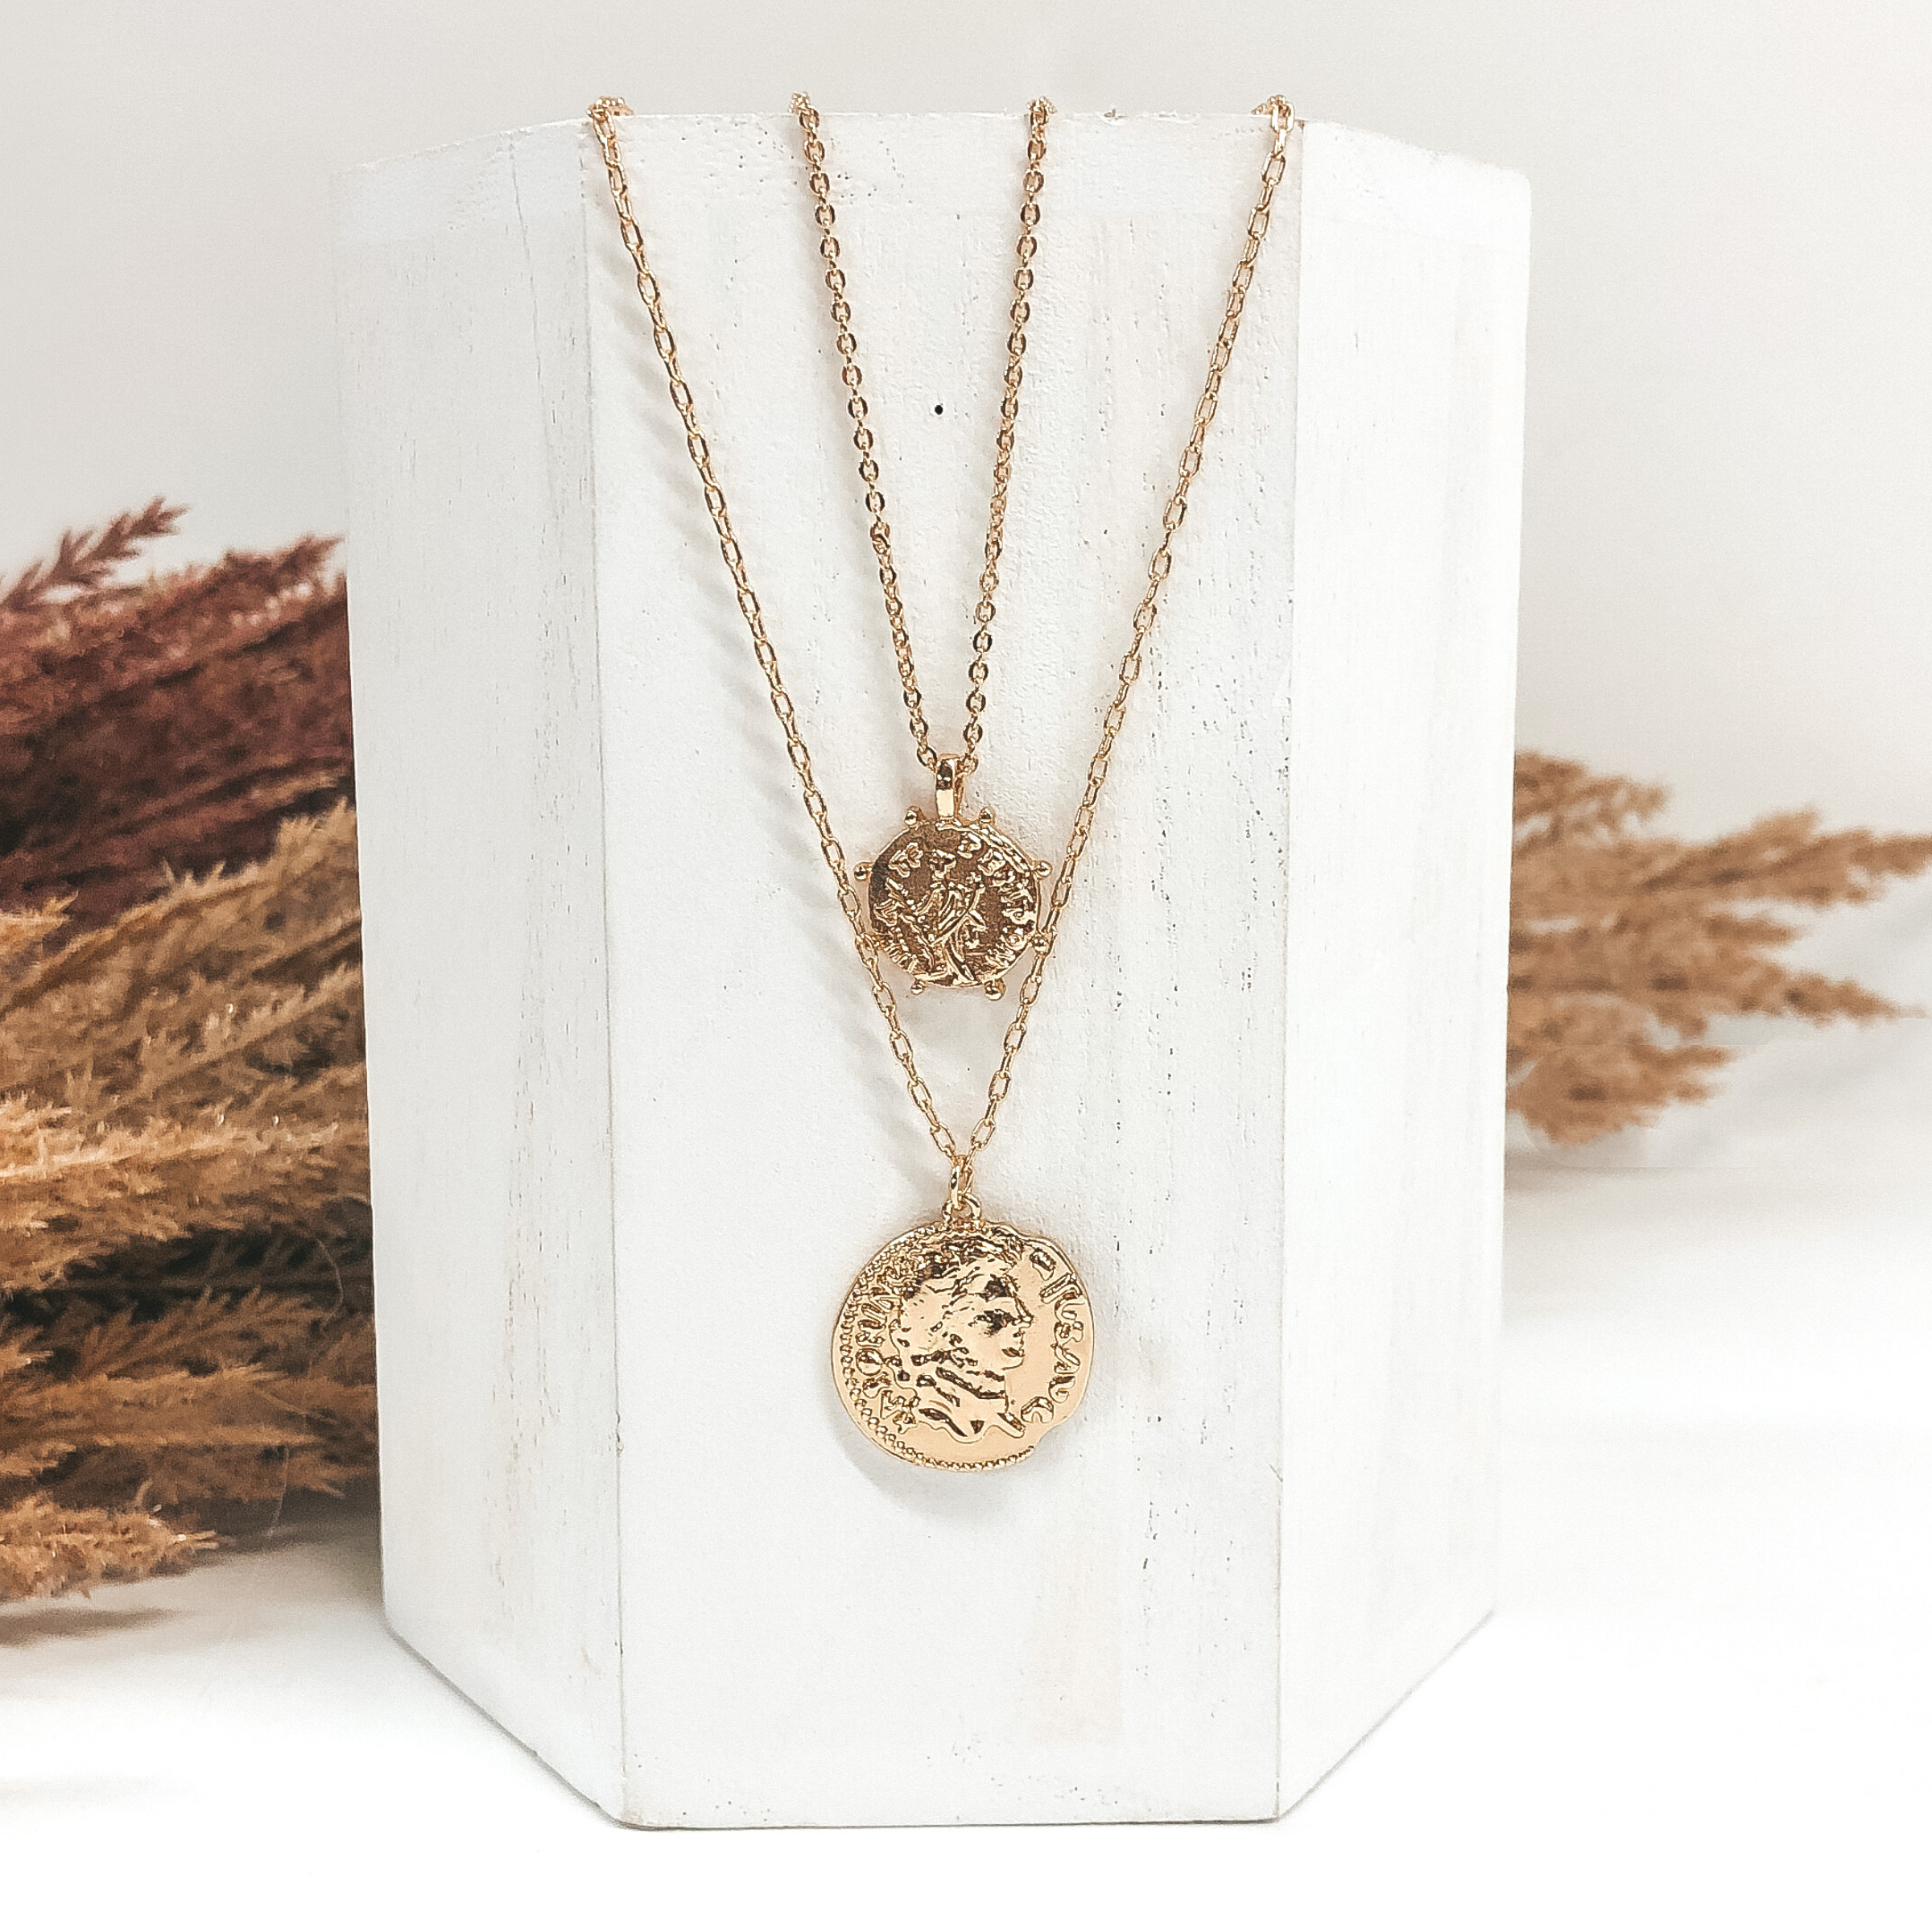 Two Strand Chained Necklace in Gold with Two Gold Coins - Giddy Up Glamour Boutique